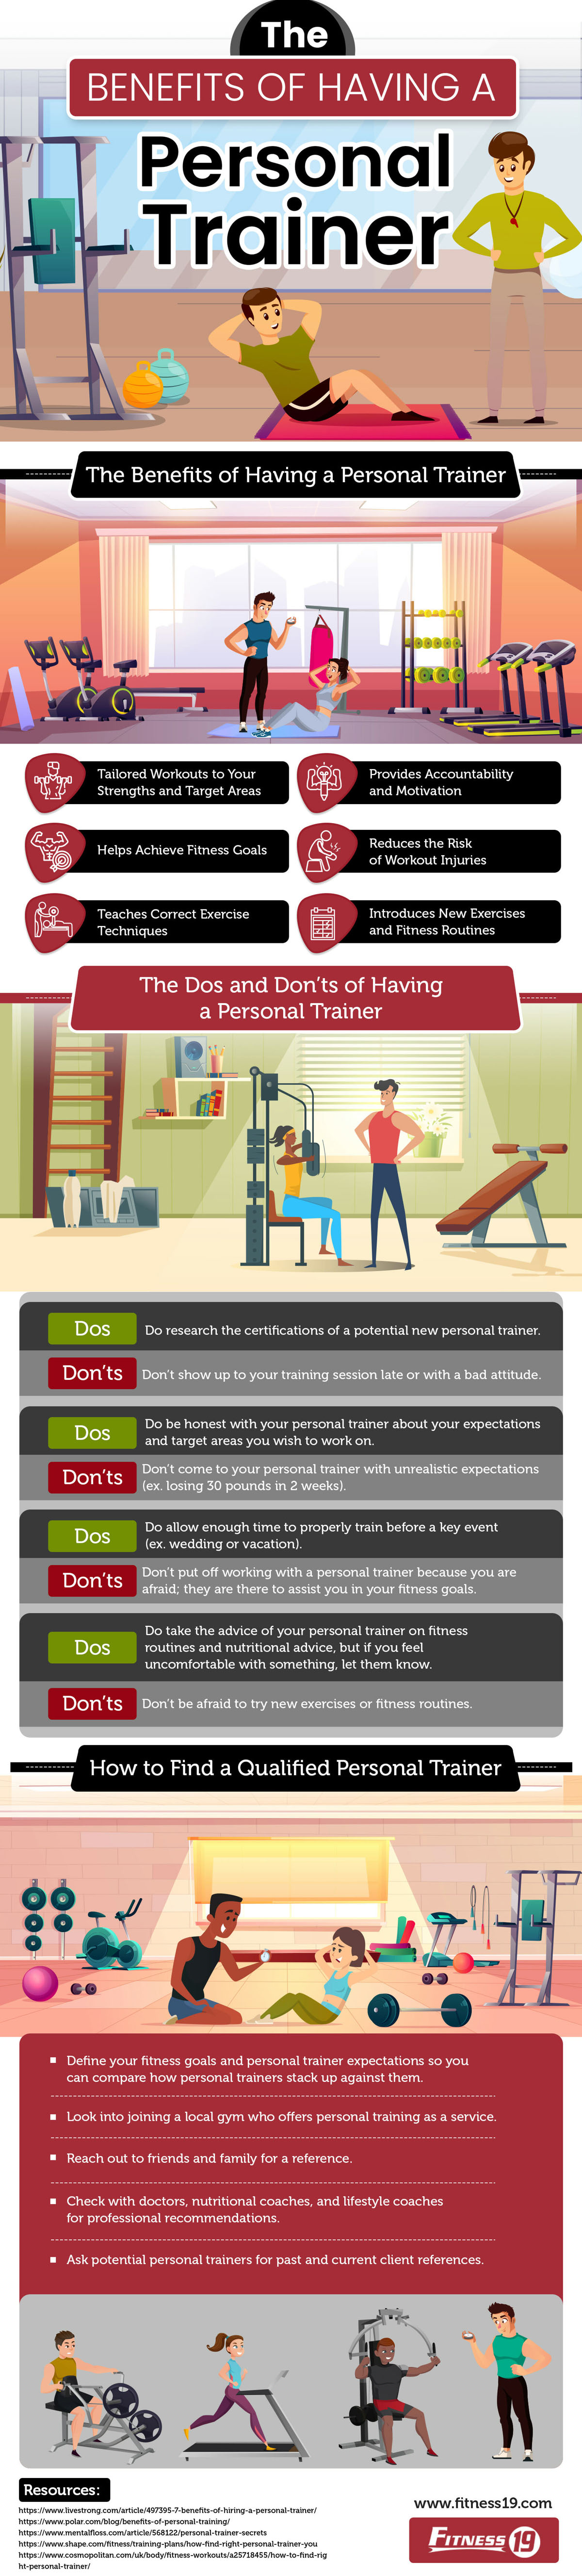 The Benefits of Having a Personal Trainer [Infographic]